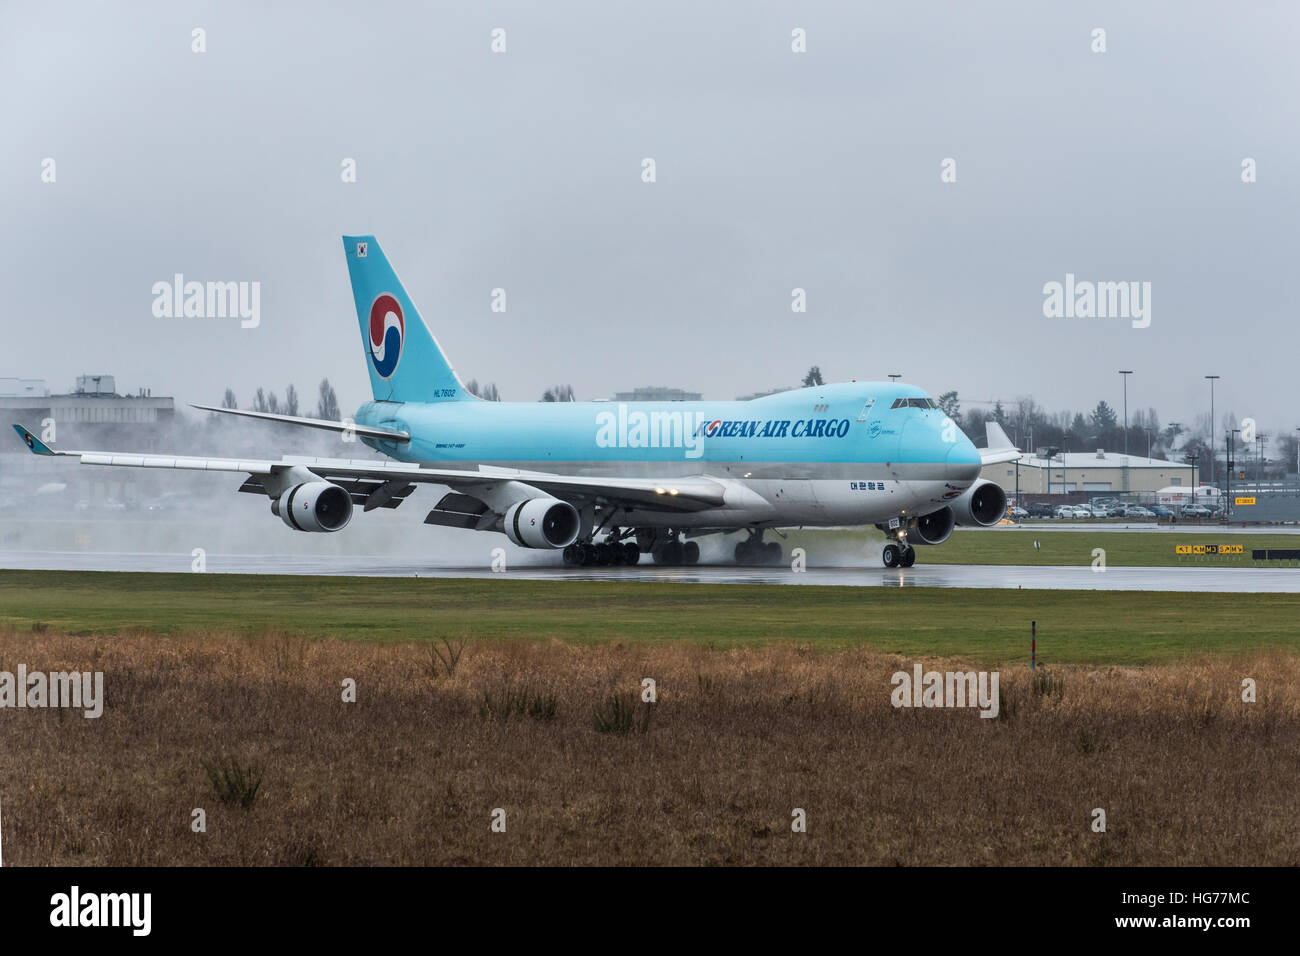 Korean Air Cargo wide body Boeing 747-400F making a landing on a wet runway at Vancouver International Airport. Stock Photo